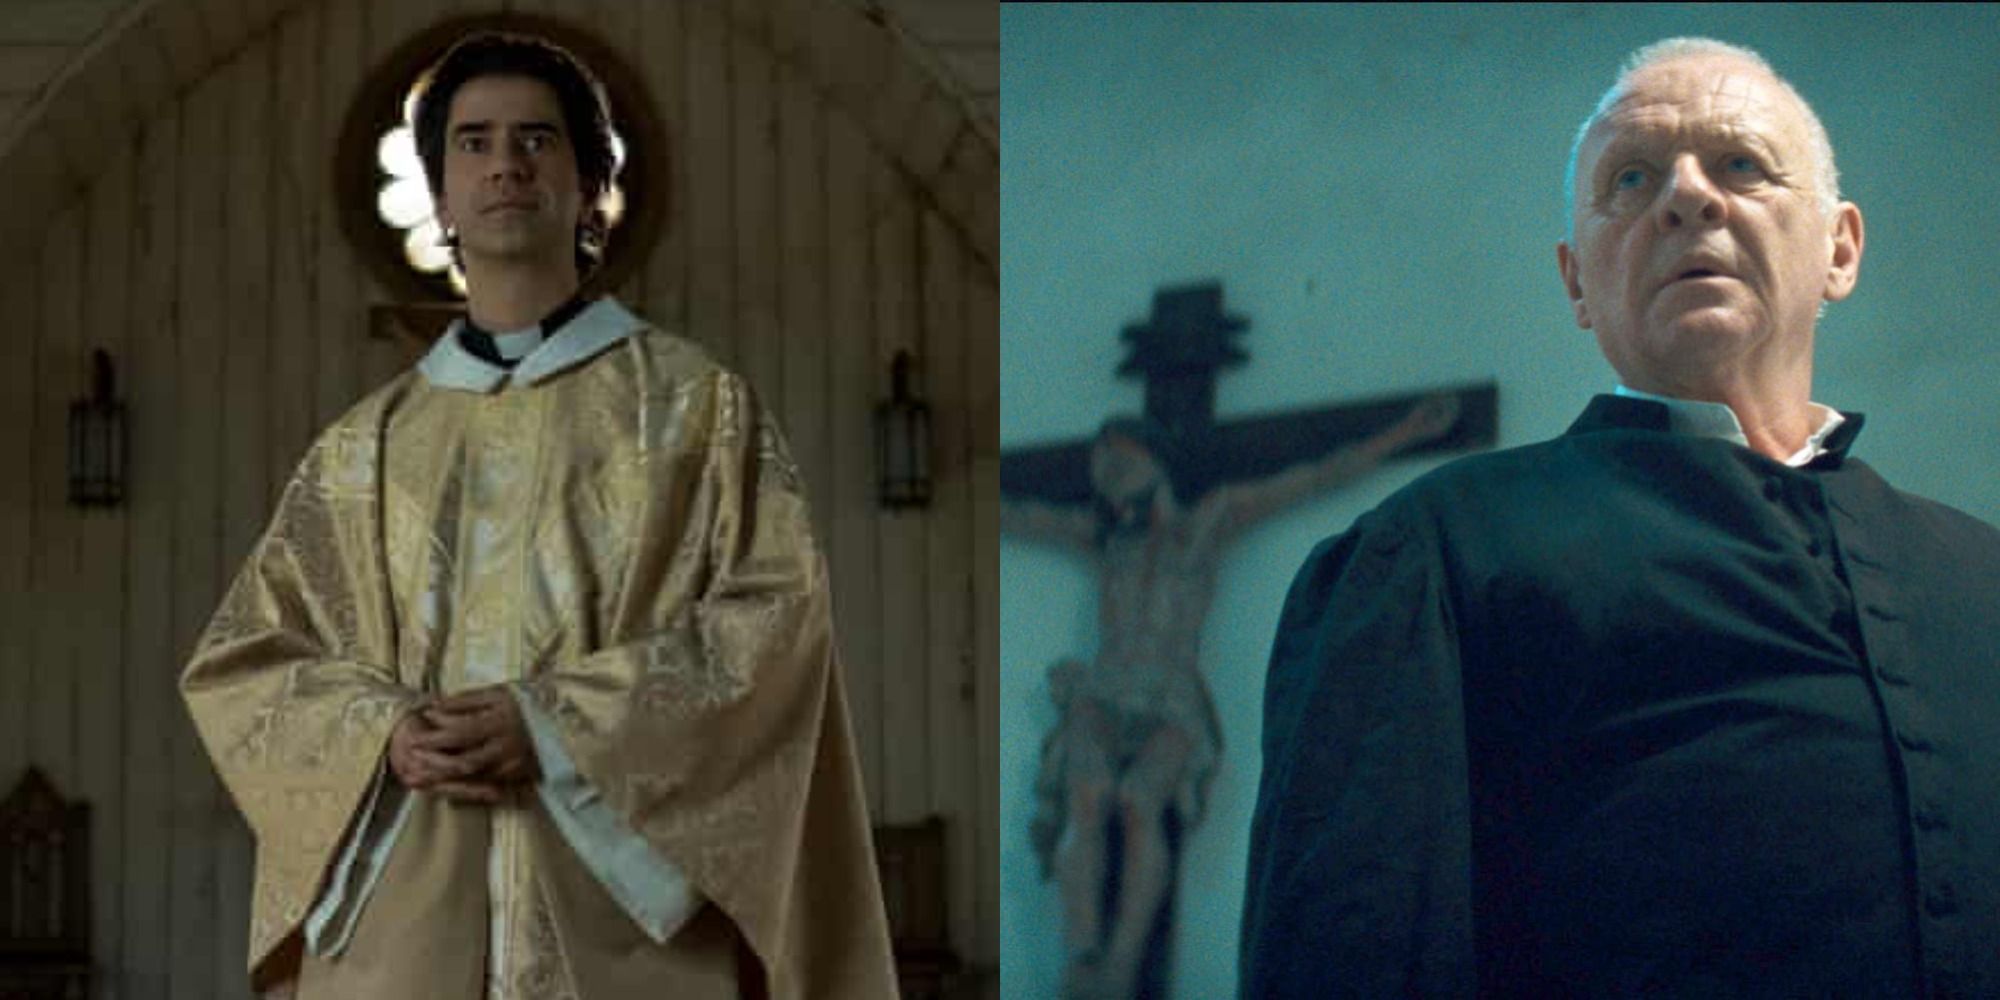 Father Paul (Hamish Linklater) in Midnight Mass and Father Lucas (Anthony Hopkins) in The Rite